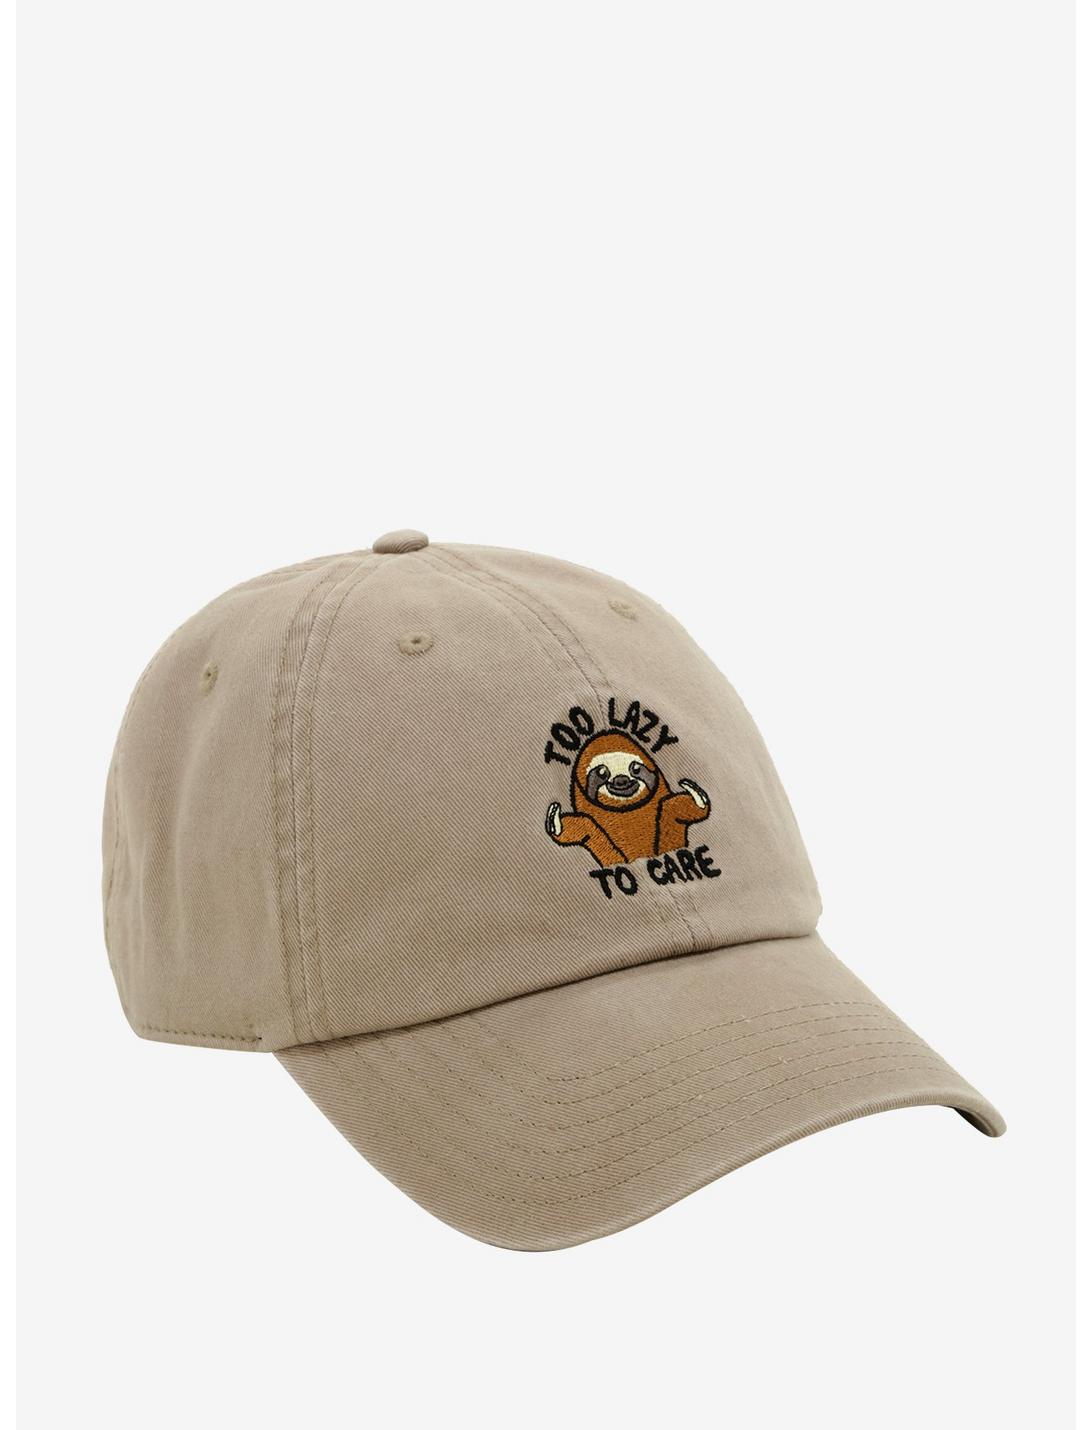 Too Lazy To Care Sloth Dad Cap, , hi-res